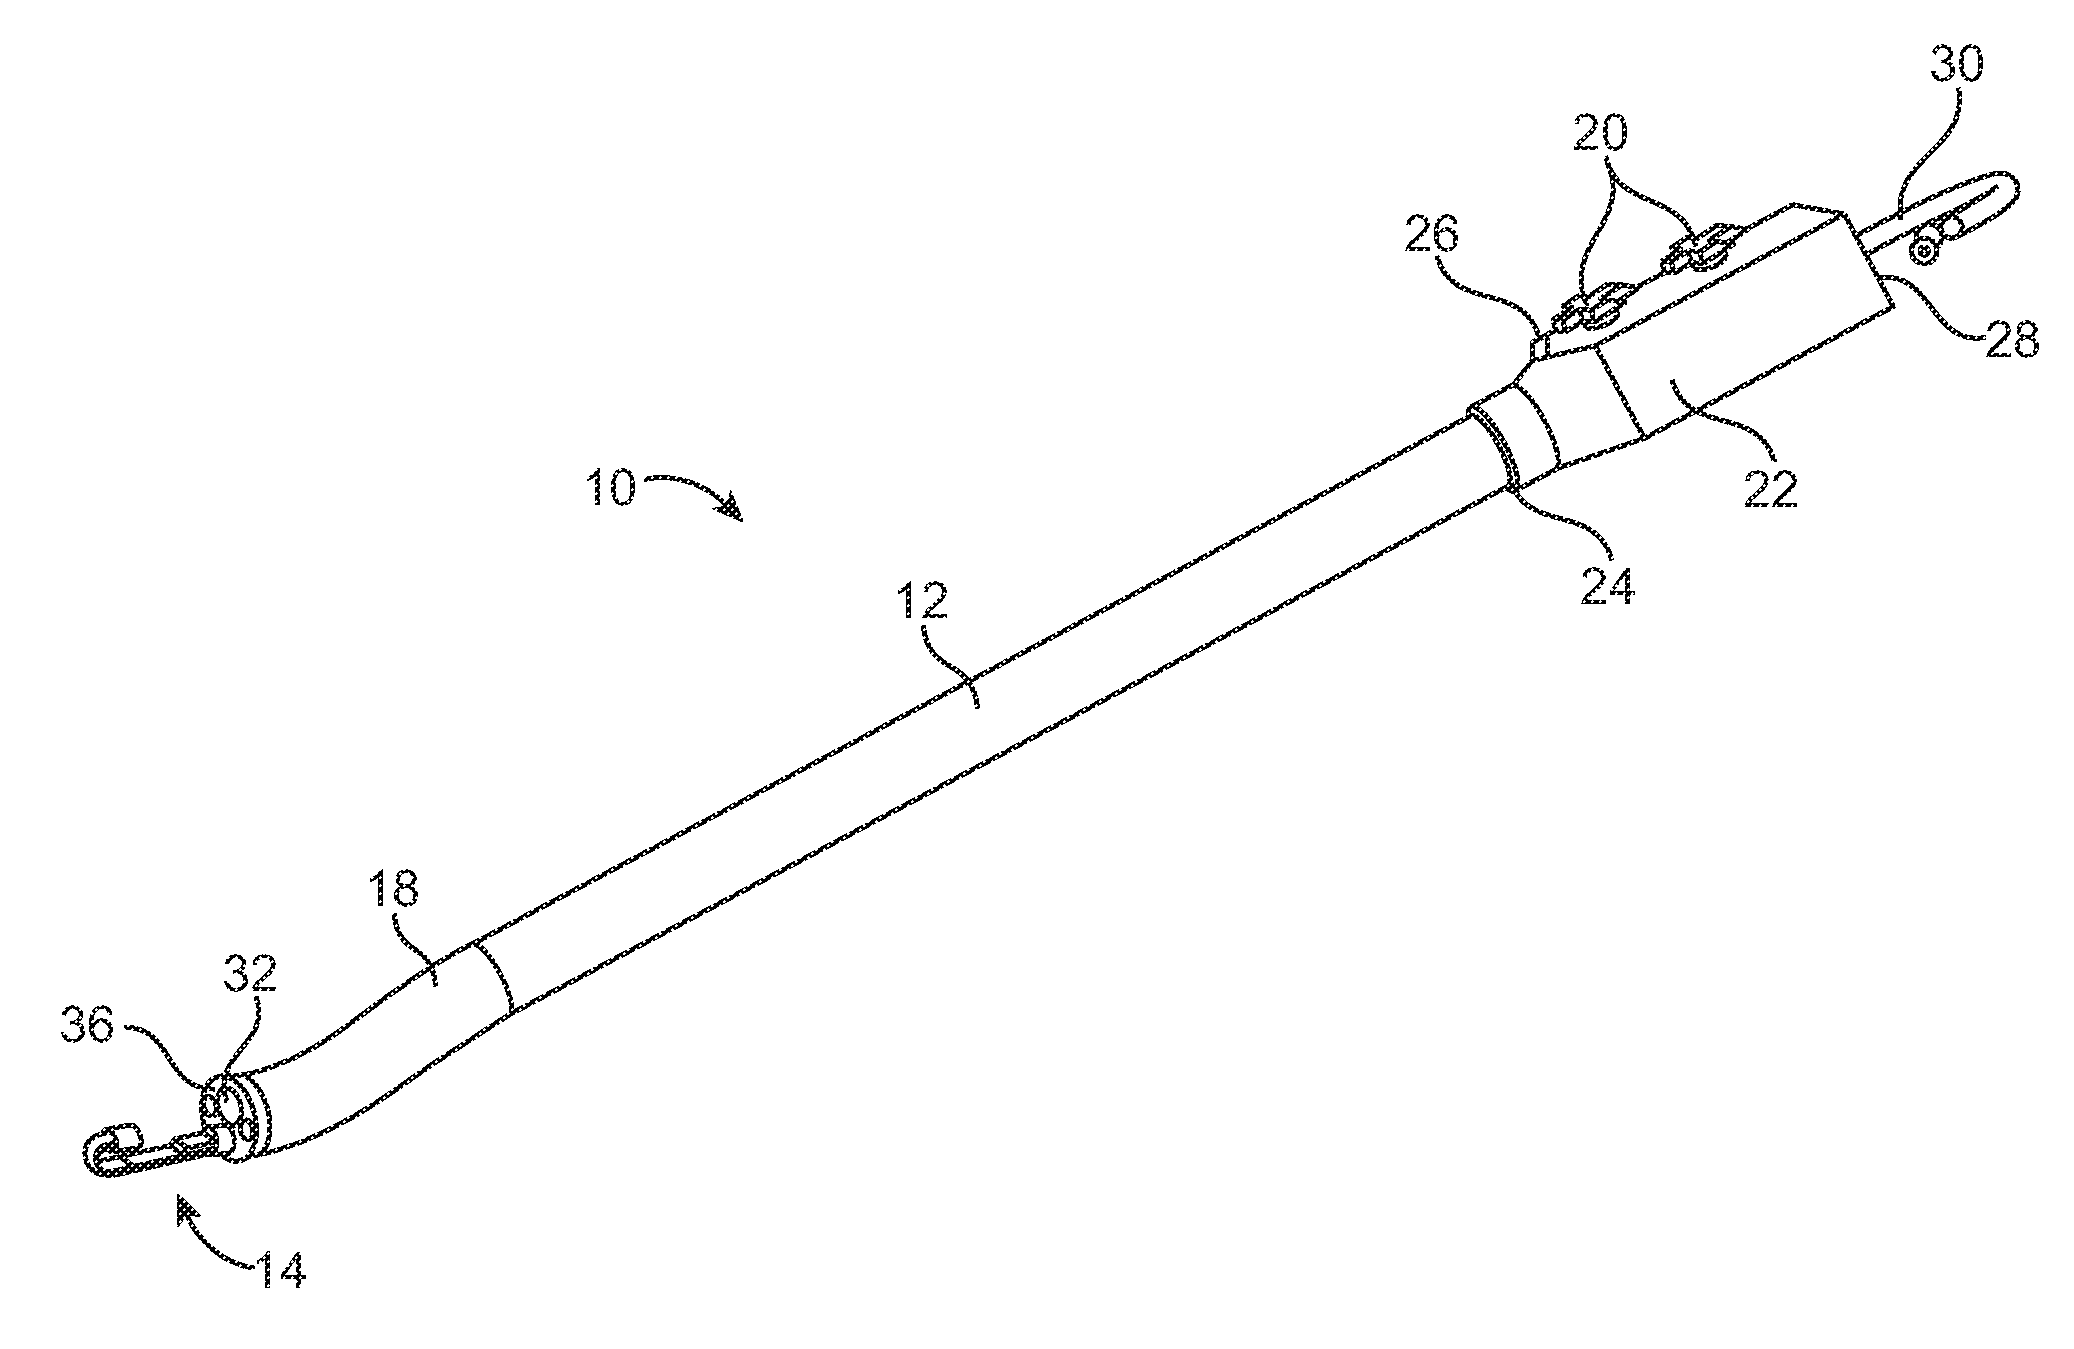 Endoscope assembly with a polarizing filter